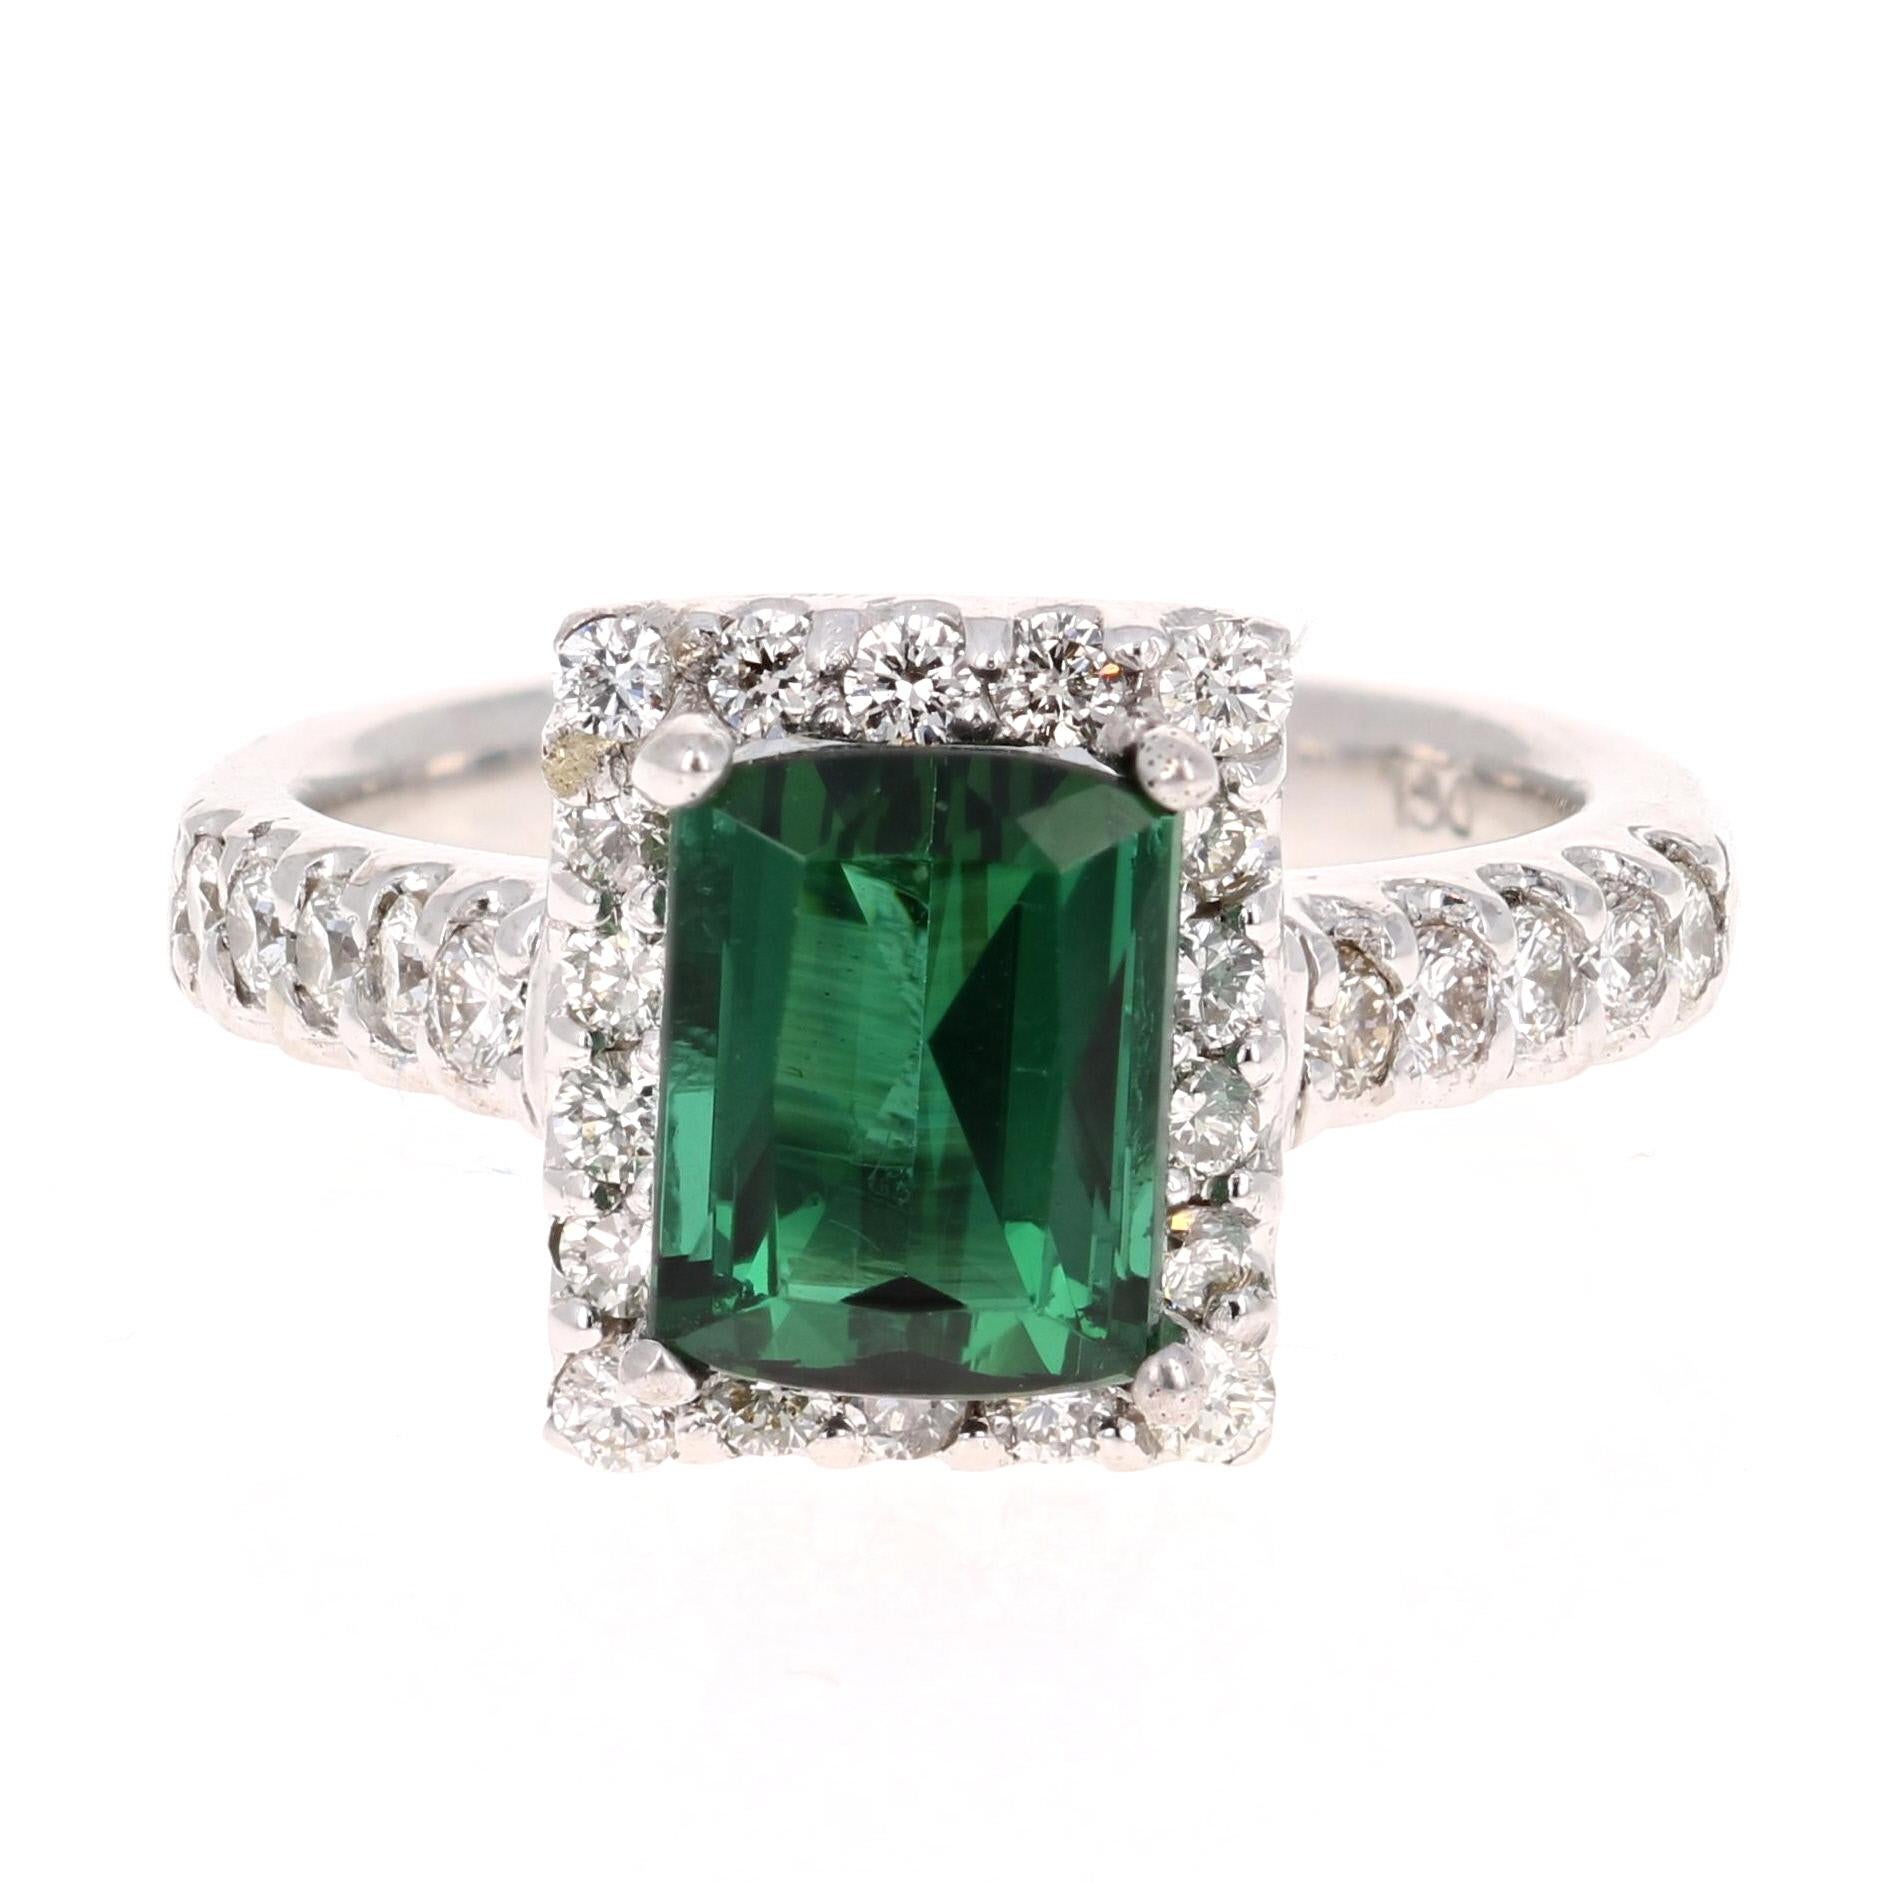 3.42 Carat Emerald Cut Green Tourmaline Diamond Cocktail Ring 

This gorgeous ring has a beautiful Emerald Cut Green Tourmaline weighing 2.69 Carats and 28 Round Cut Diamonds weighing 0.73 Carats.  The total carat weight of the ring is 3.42